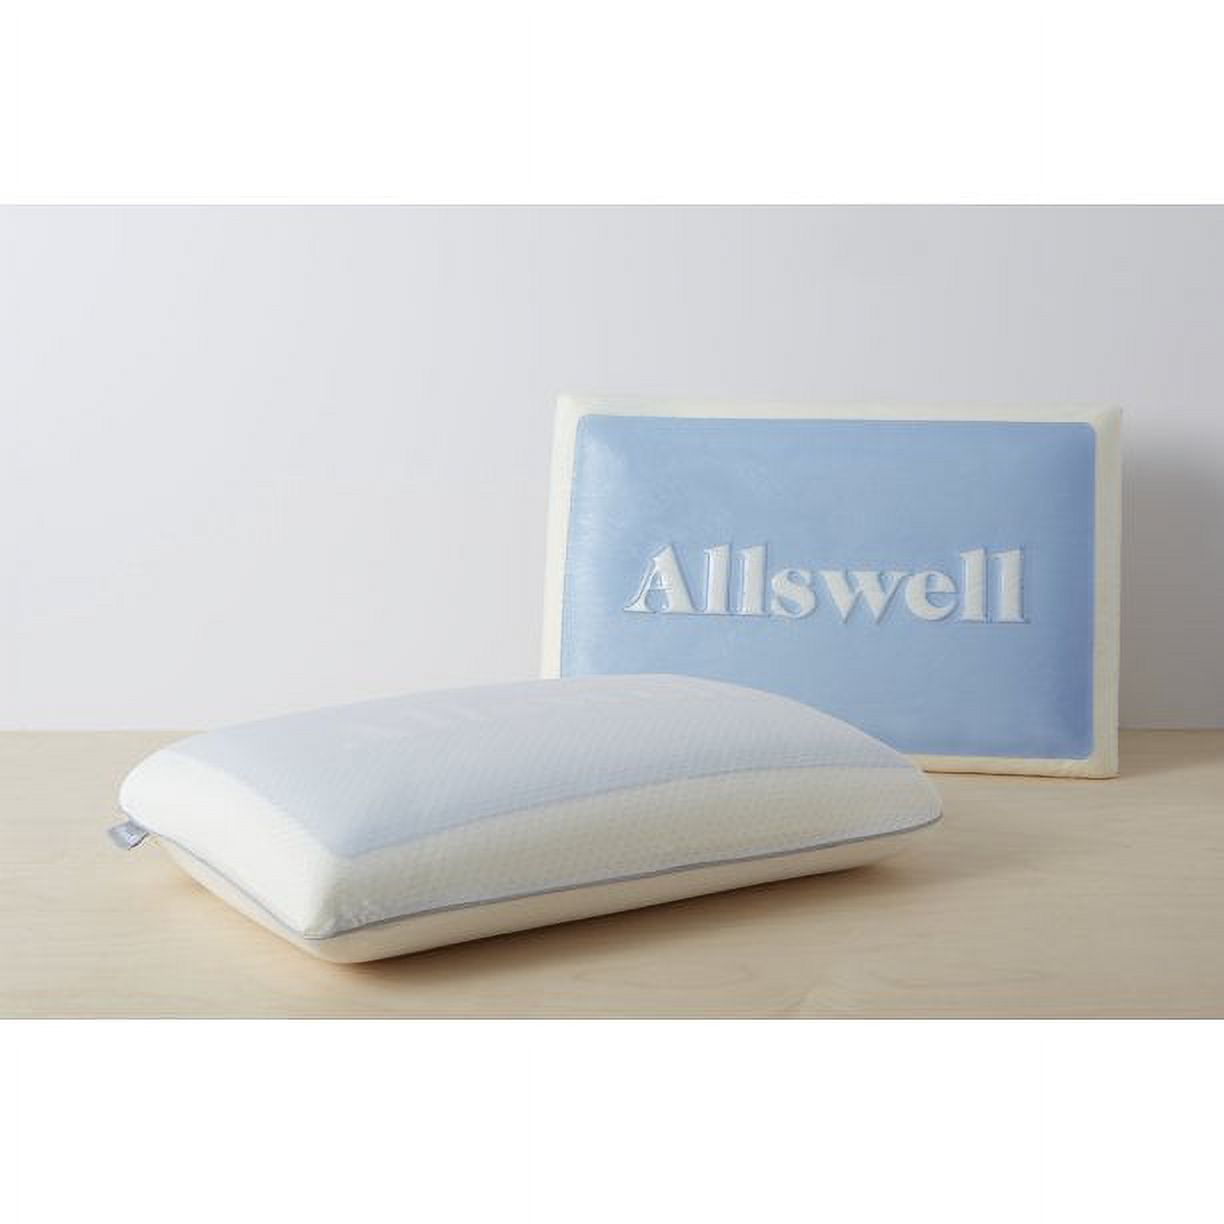 Allswell Cooling Gel Memory Foam Pillow, Queen Size - image 4 of 8